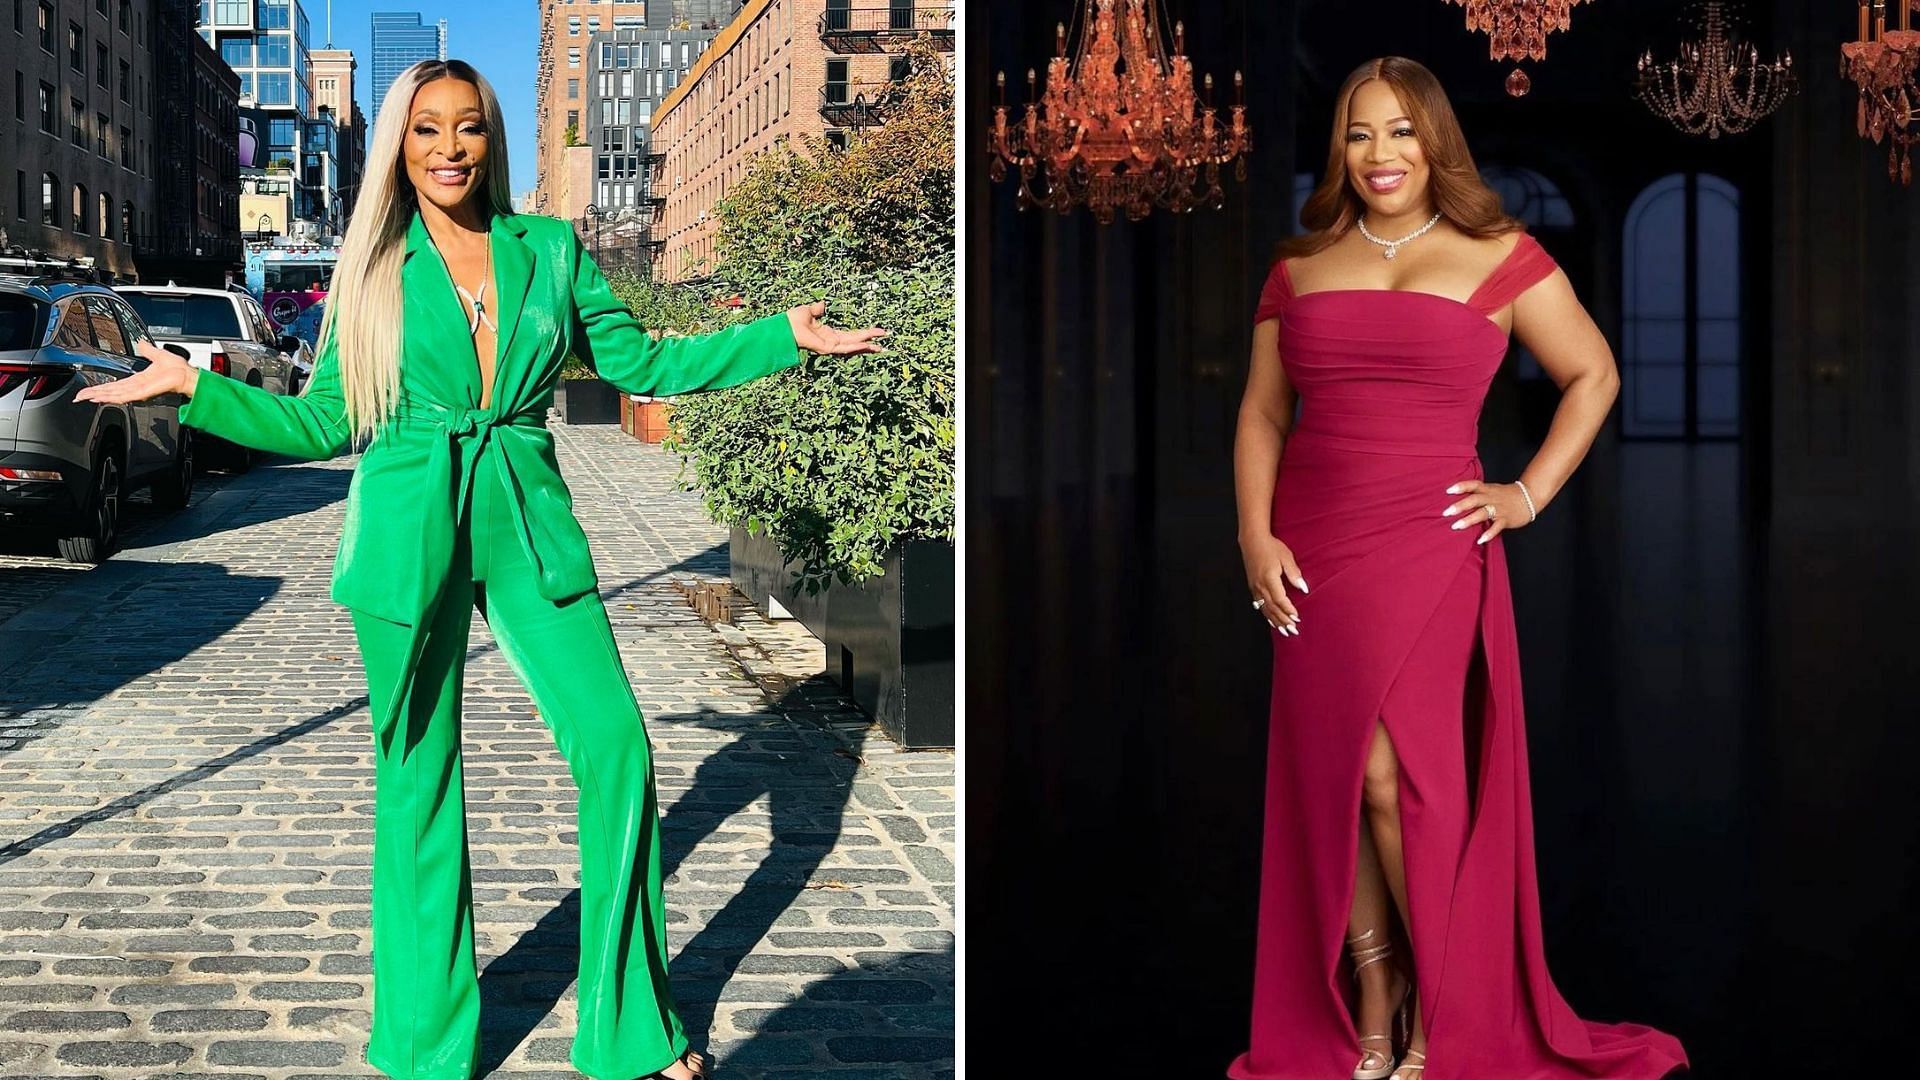 Karen and Charrisse hash out their differences on RHOP